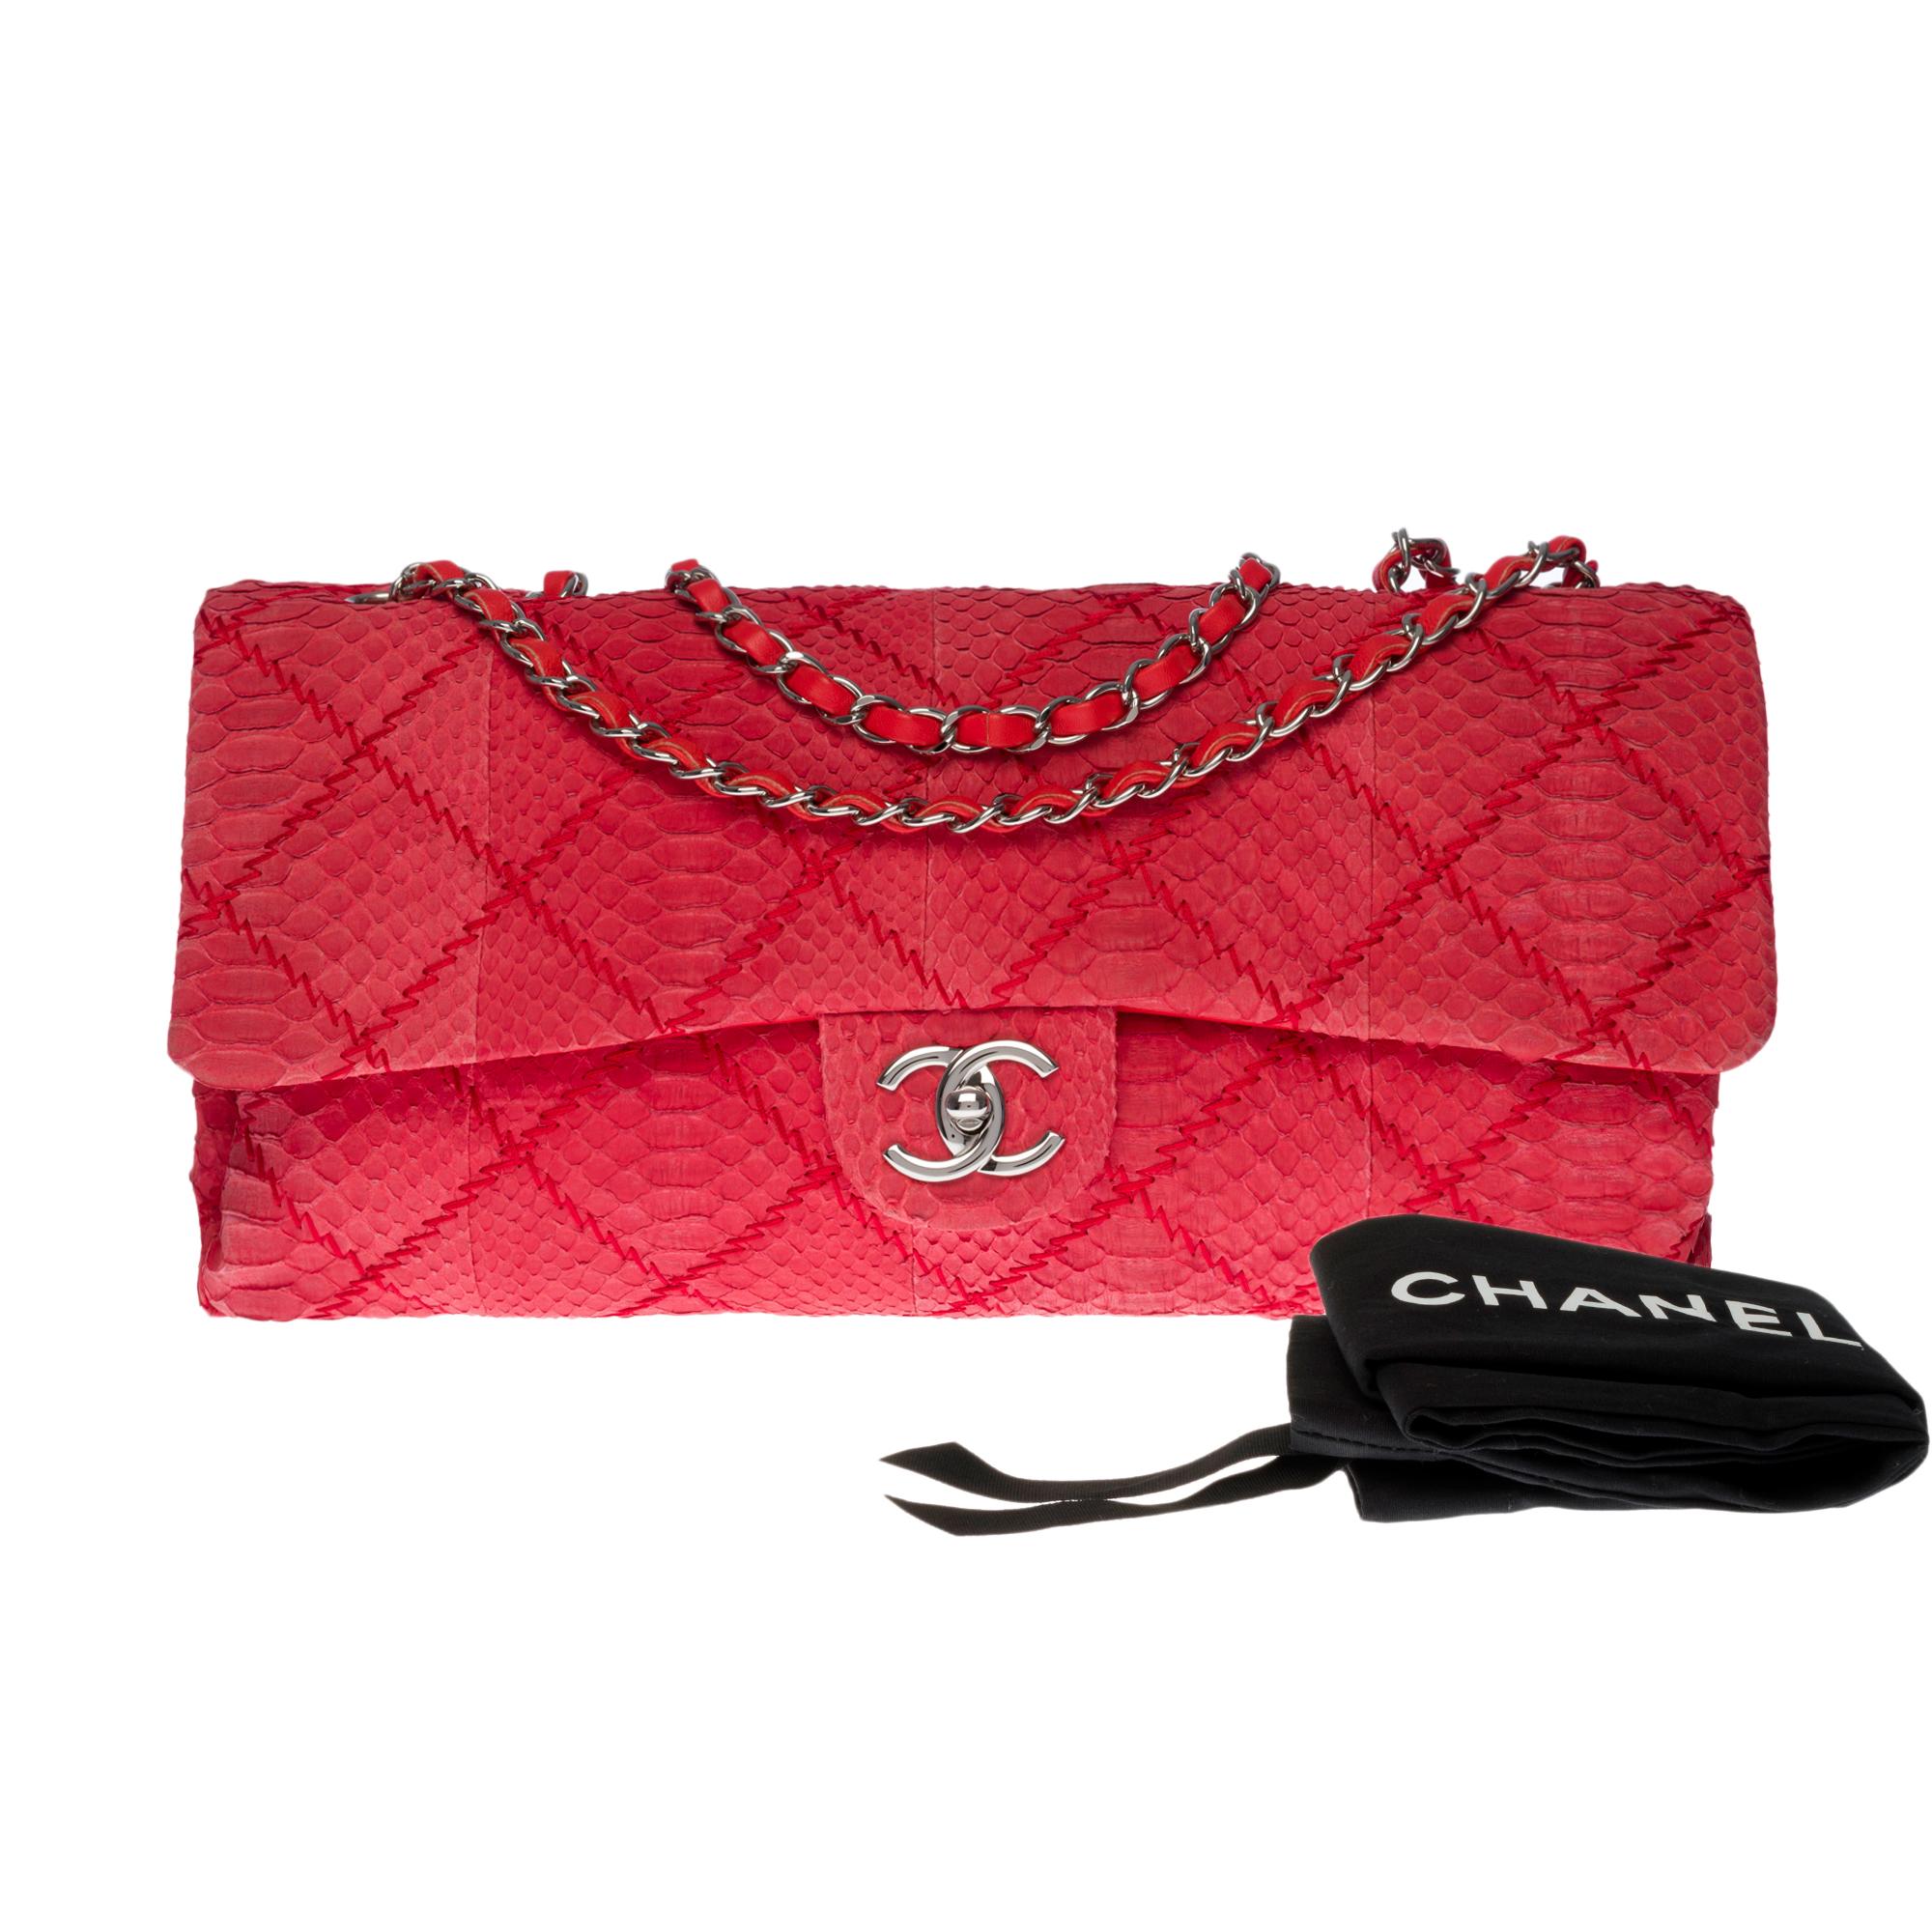 Chanel Classic XL shoulder bag in red quilted Python, silver hardware For Sale 4